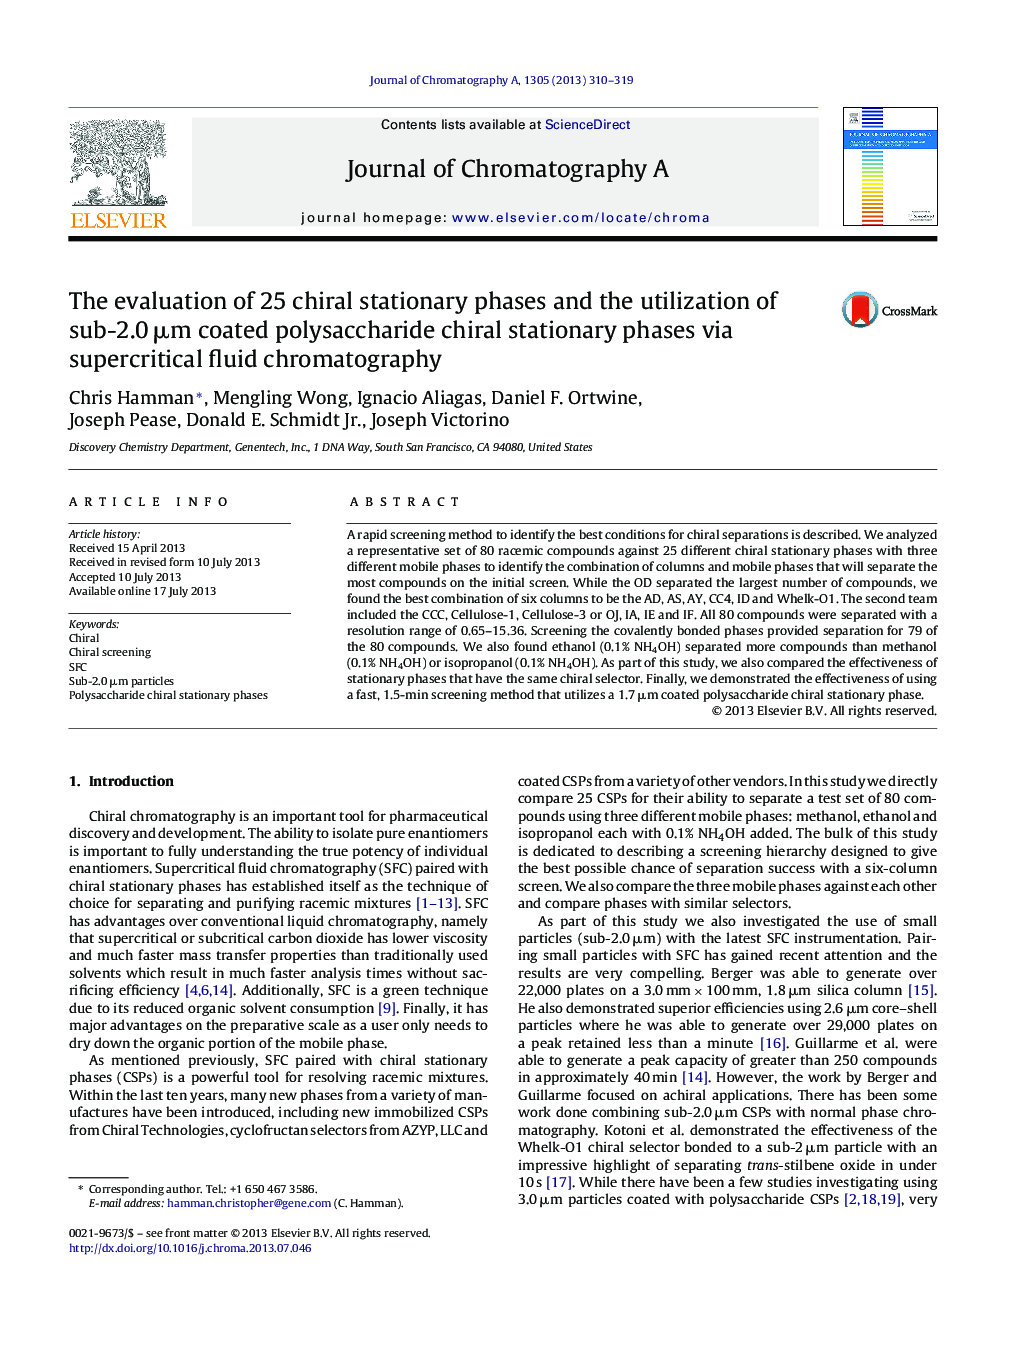 The evaluation of 25 chiral stationary phases and the utilization of sub-2.0Â Î¼m coated polysaccharide chiral stationary phases via supercritical fluid chromatography